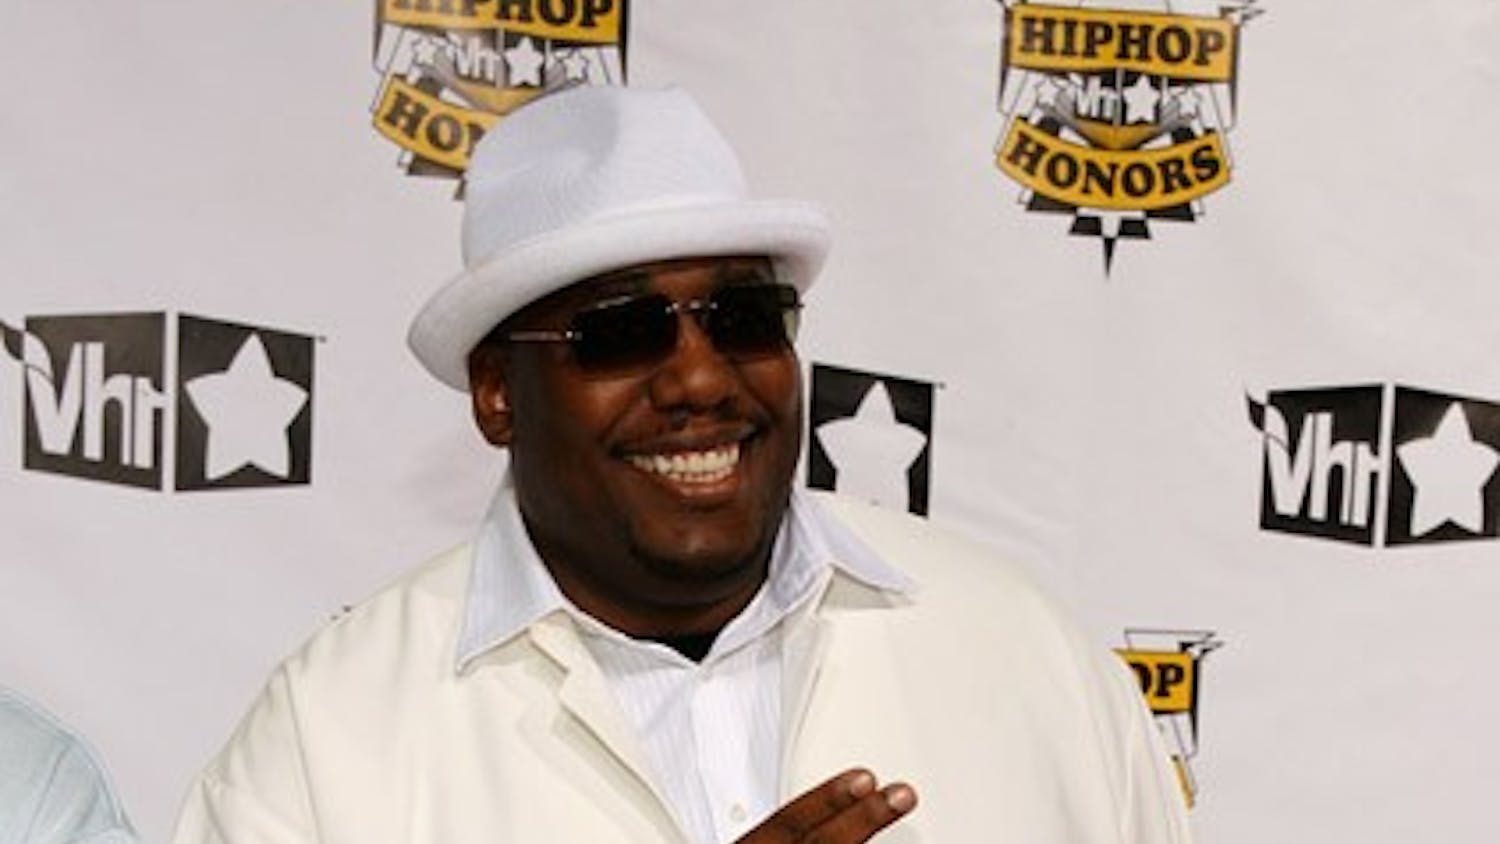 attends the 2007 VH1 Hip Hop Honors at Hammerstein Ballroom on October 4, 2007 in New York City.